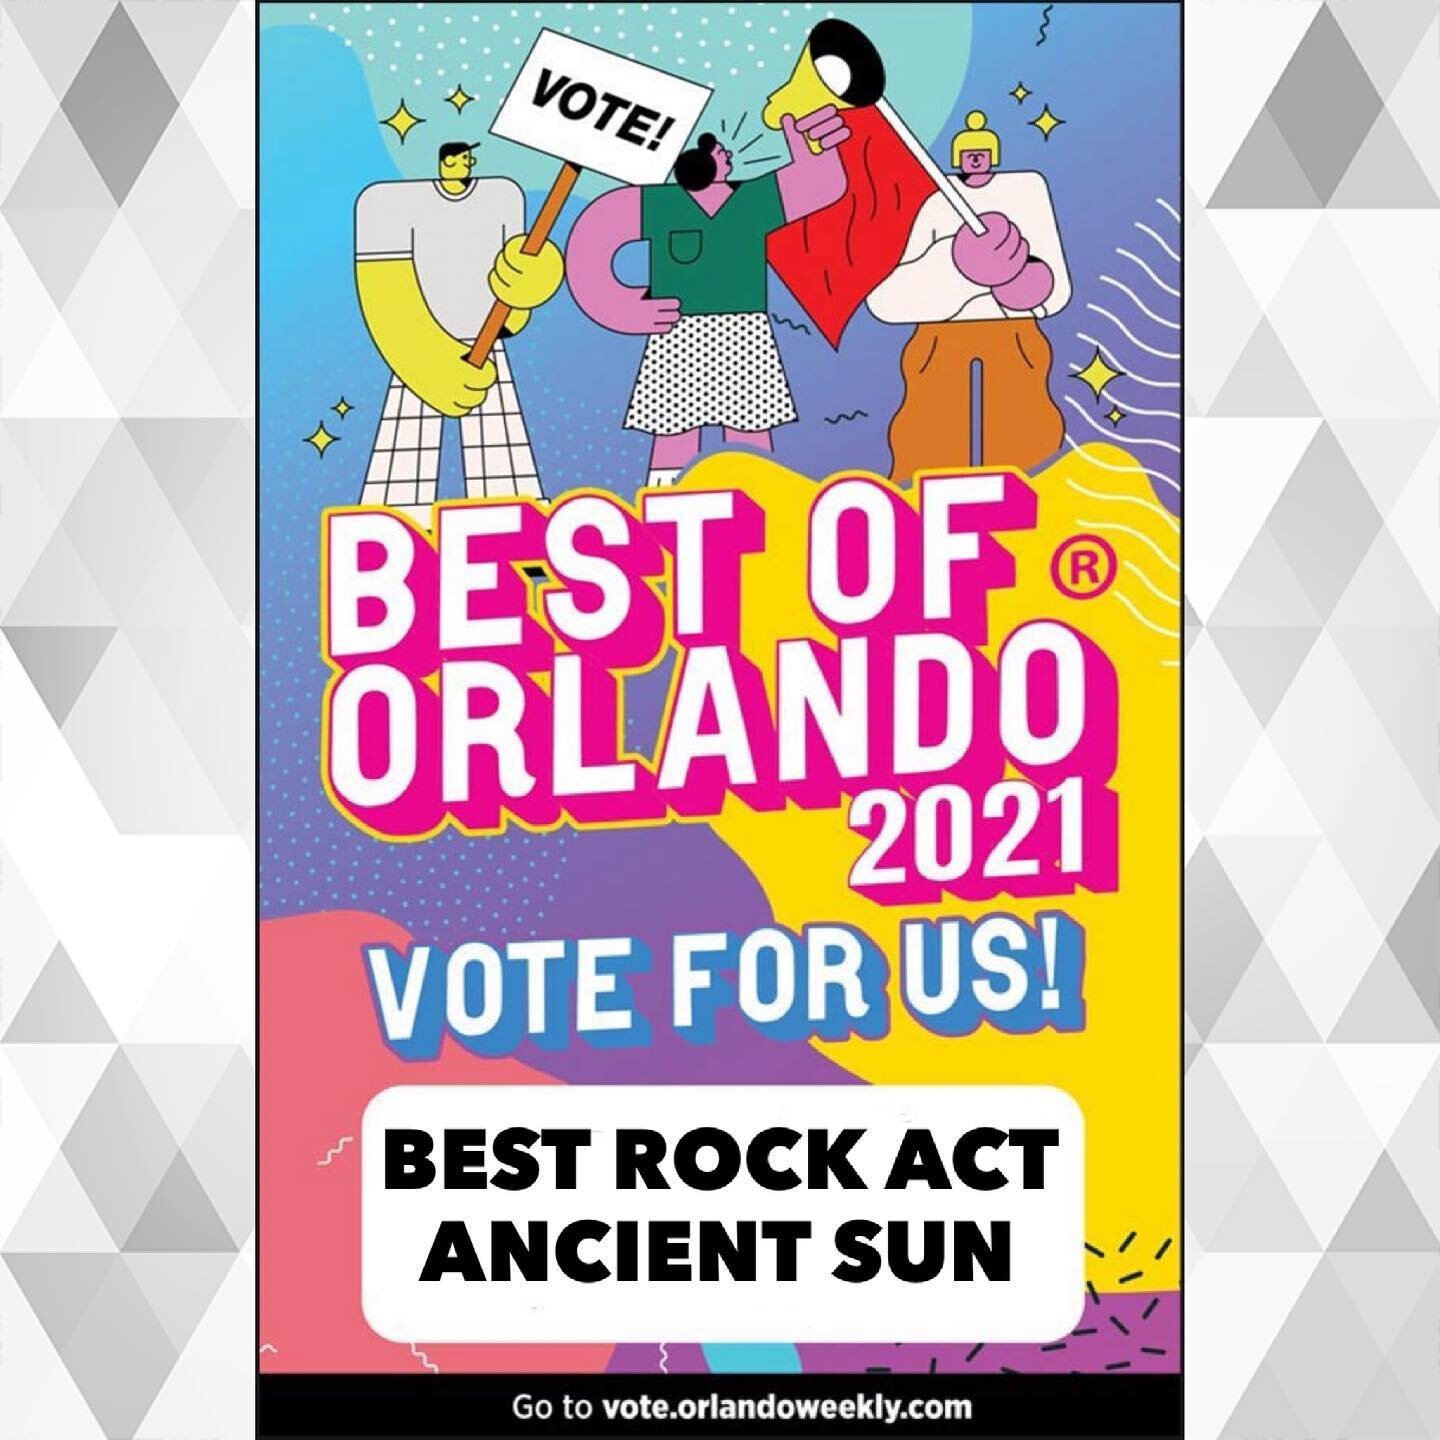 We are nominated for this years Best of Orlando competition by @orlandoweekly for BEST ROCK ACT! Please go vote for us! Thank you for all the love and support! **Link in Bio** 🤘❤️